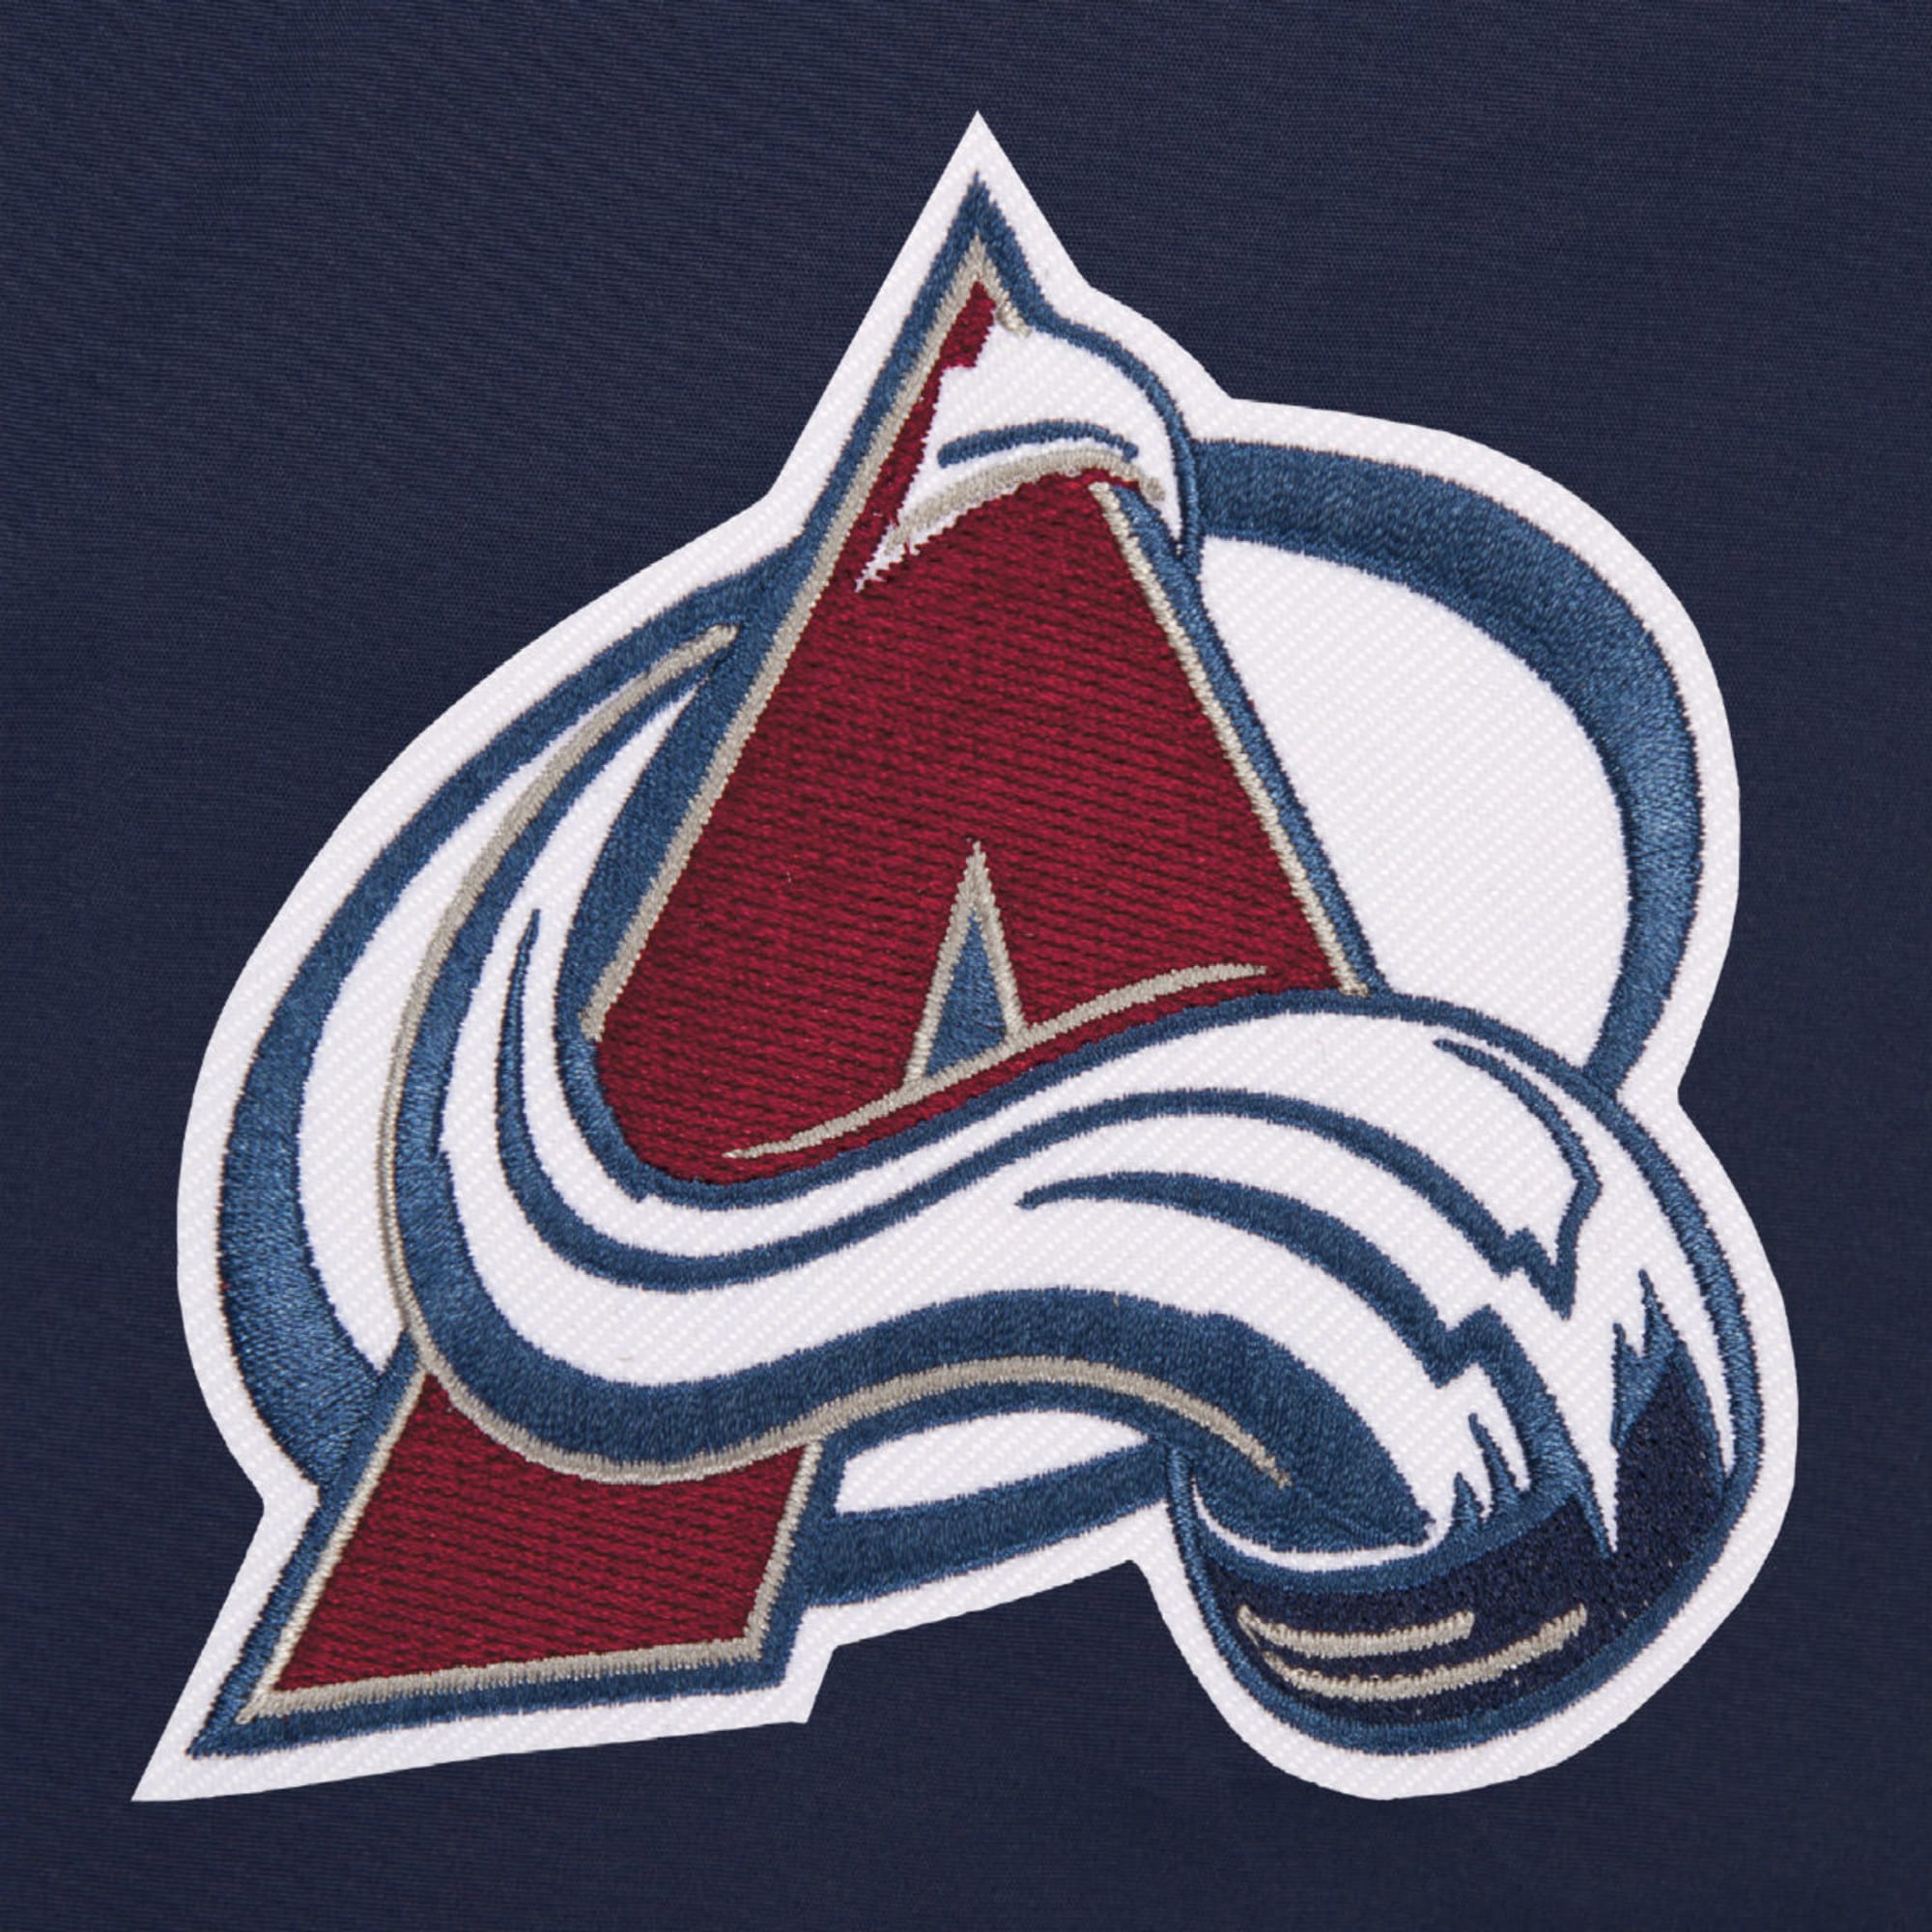 Men's JH Design Navy Colorado Avalanche 3-Time Stanley Cup Champions  Reversible Fleece and Faux Leather